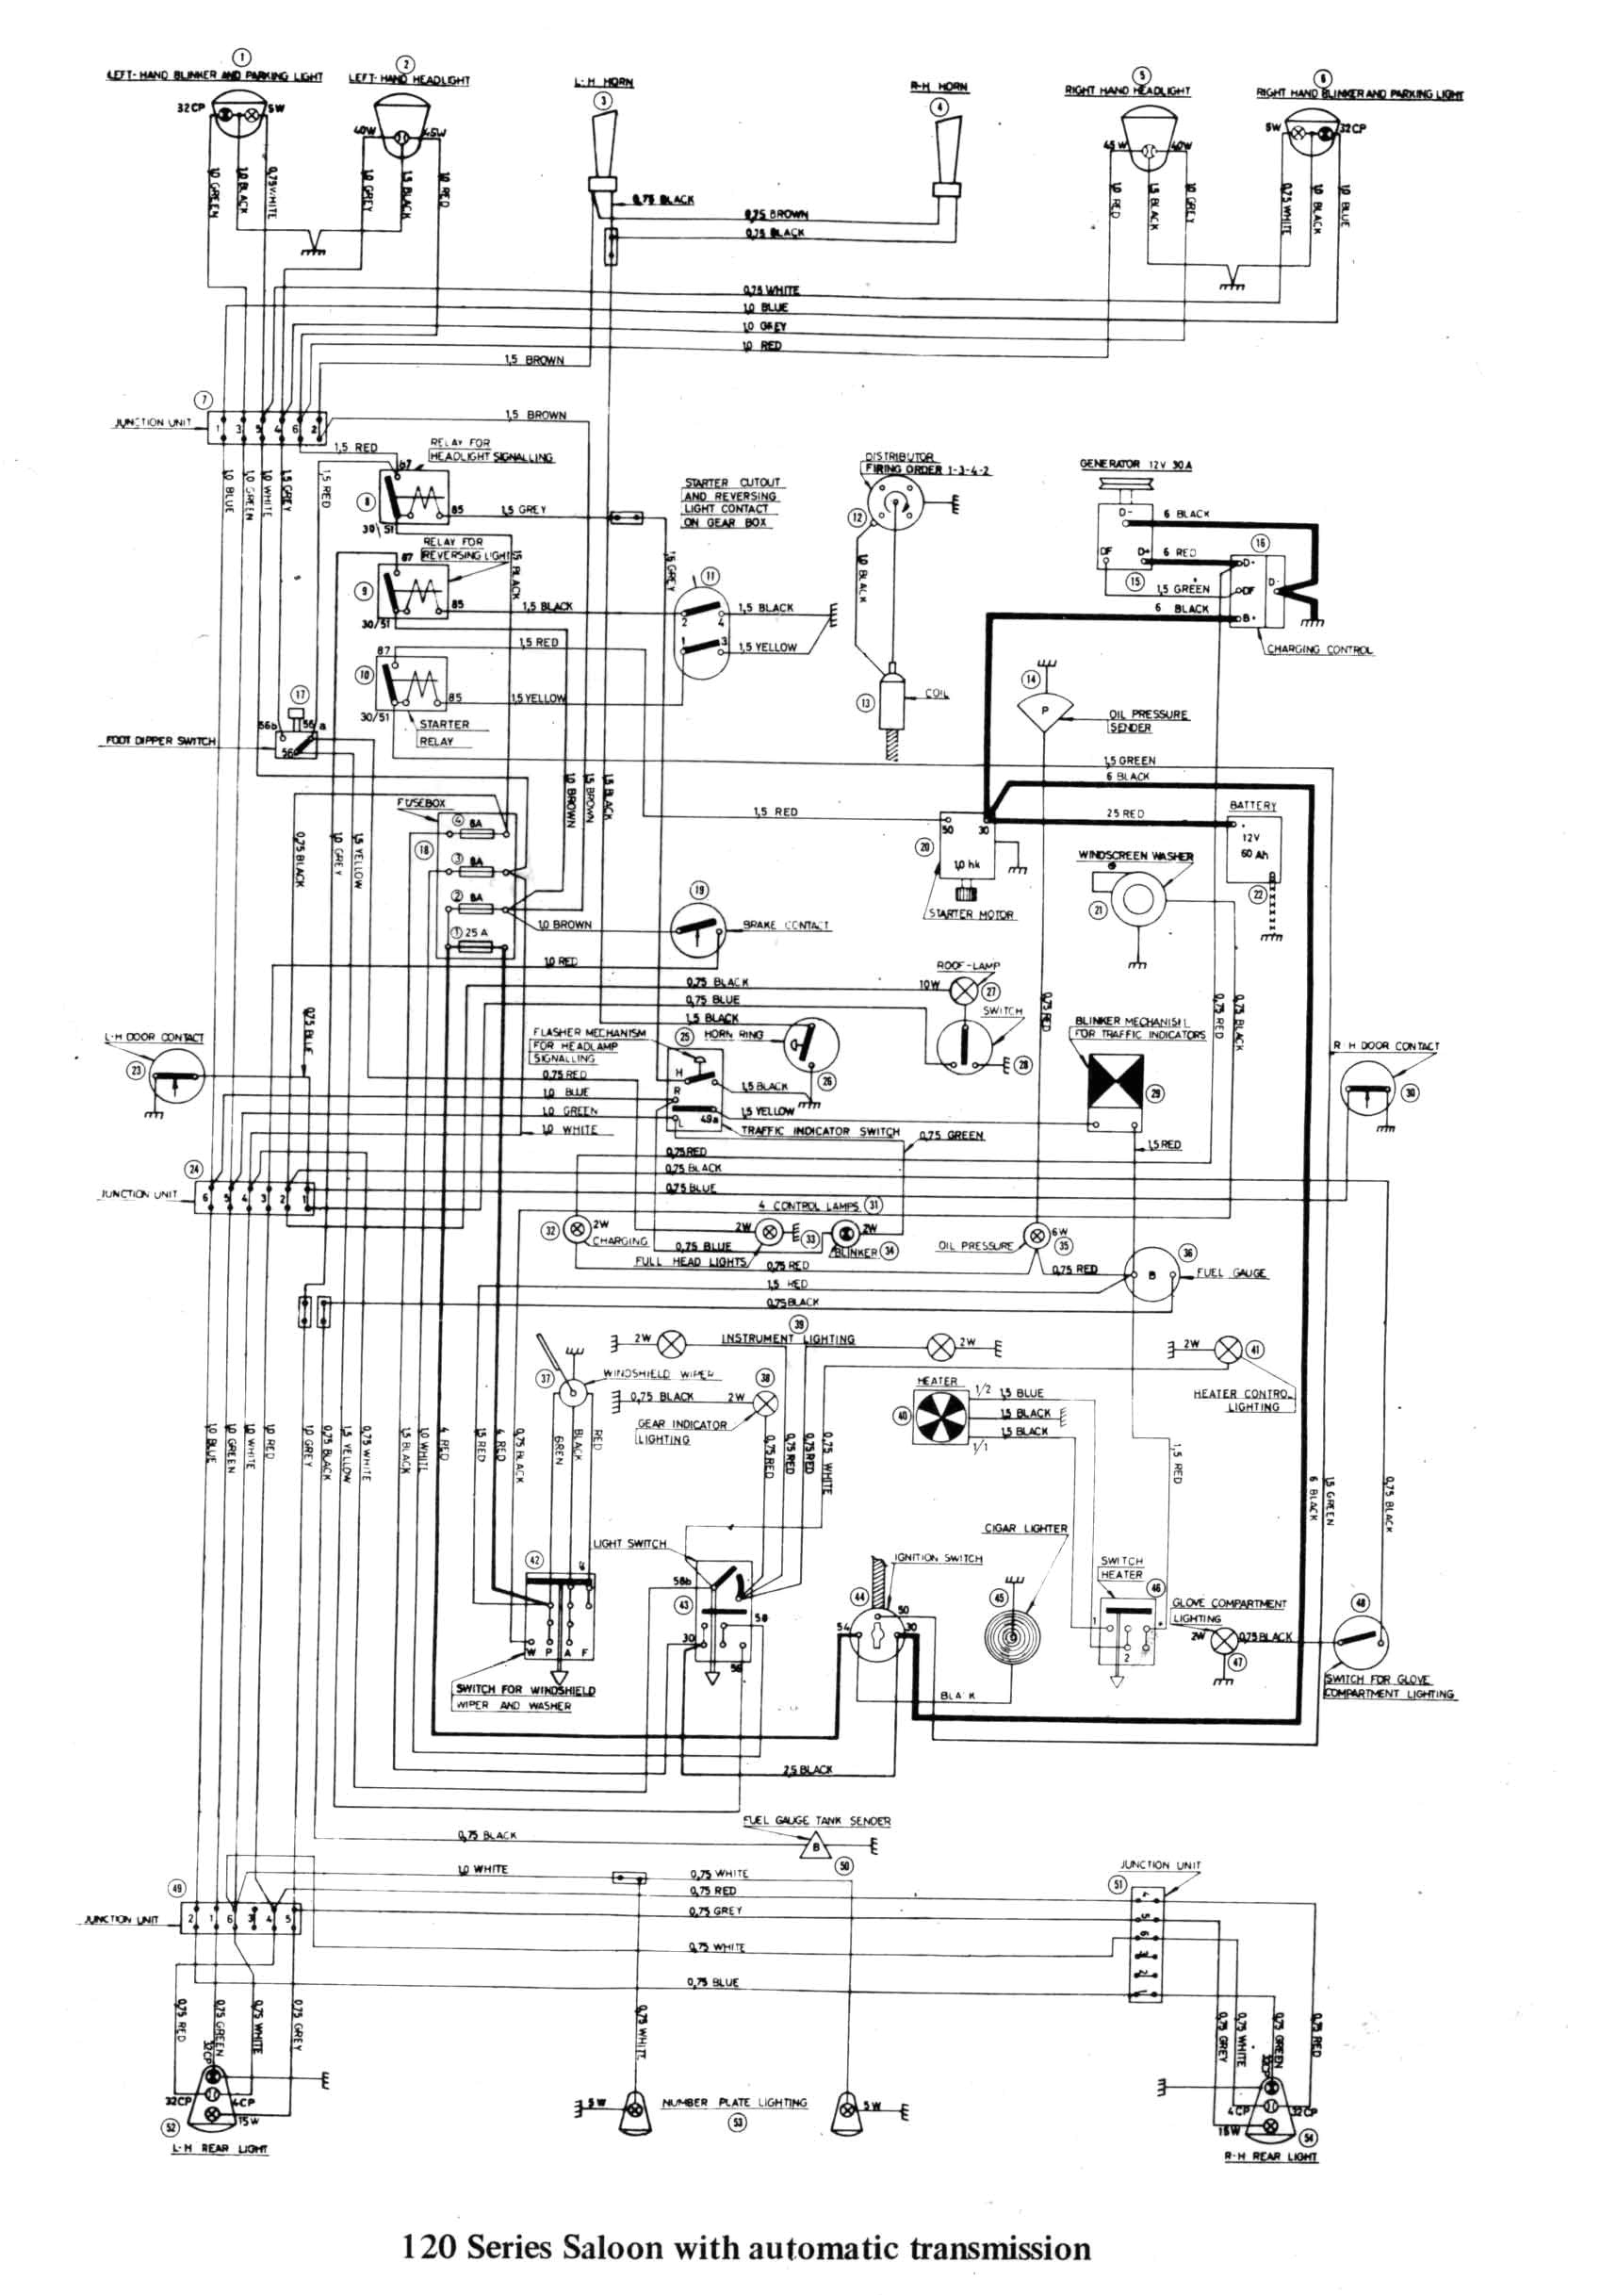 labelled circuit diagram new labelled circuit diagram lovely wiring diagram od rv park